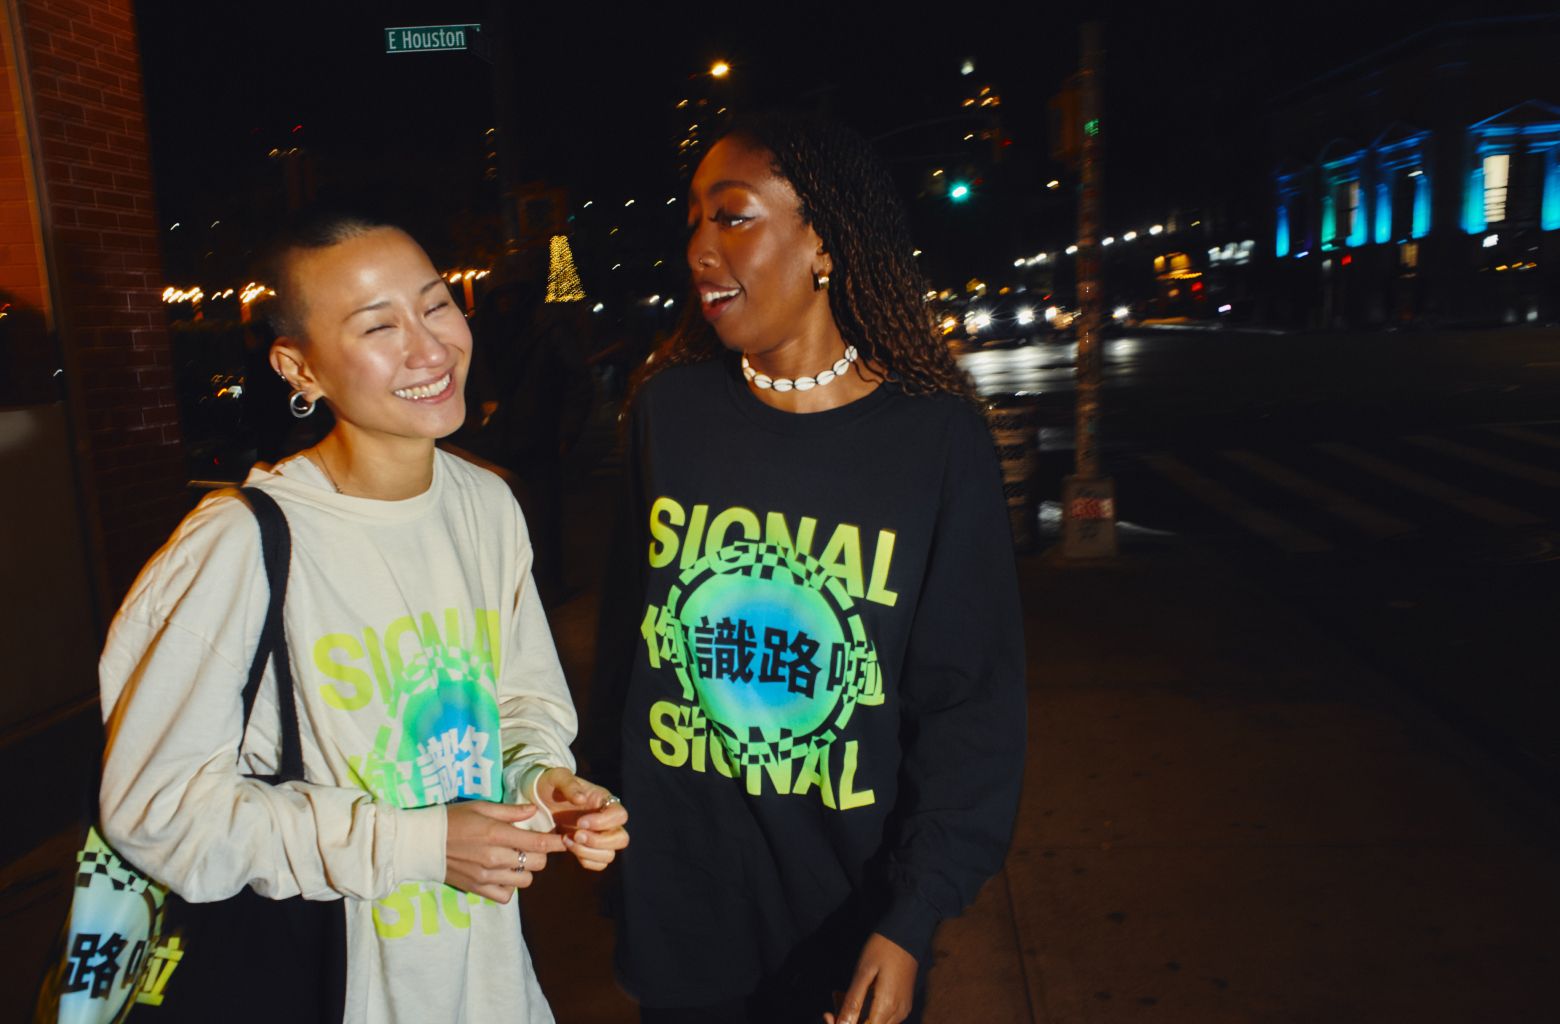 Two friends walking down the street at night wearing Signal longsleeve shirts and holding a Signal tote bag.